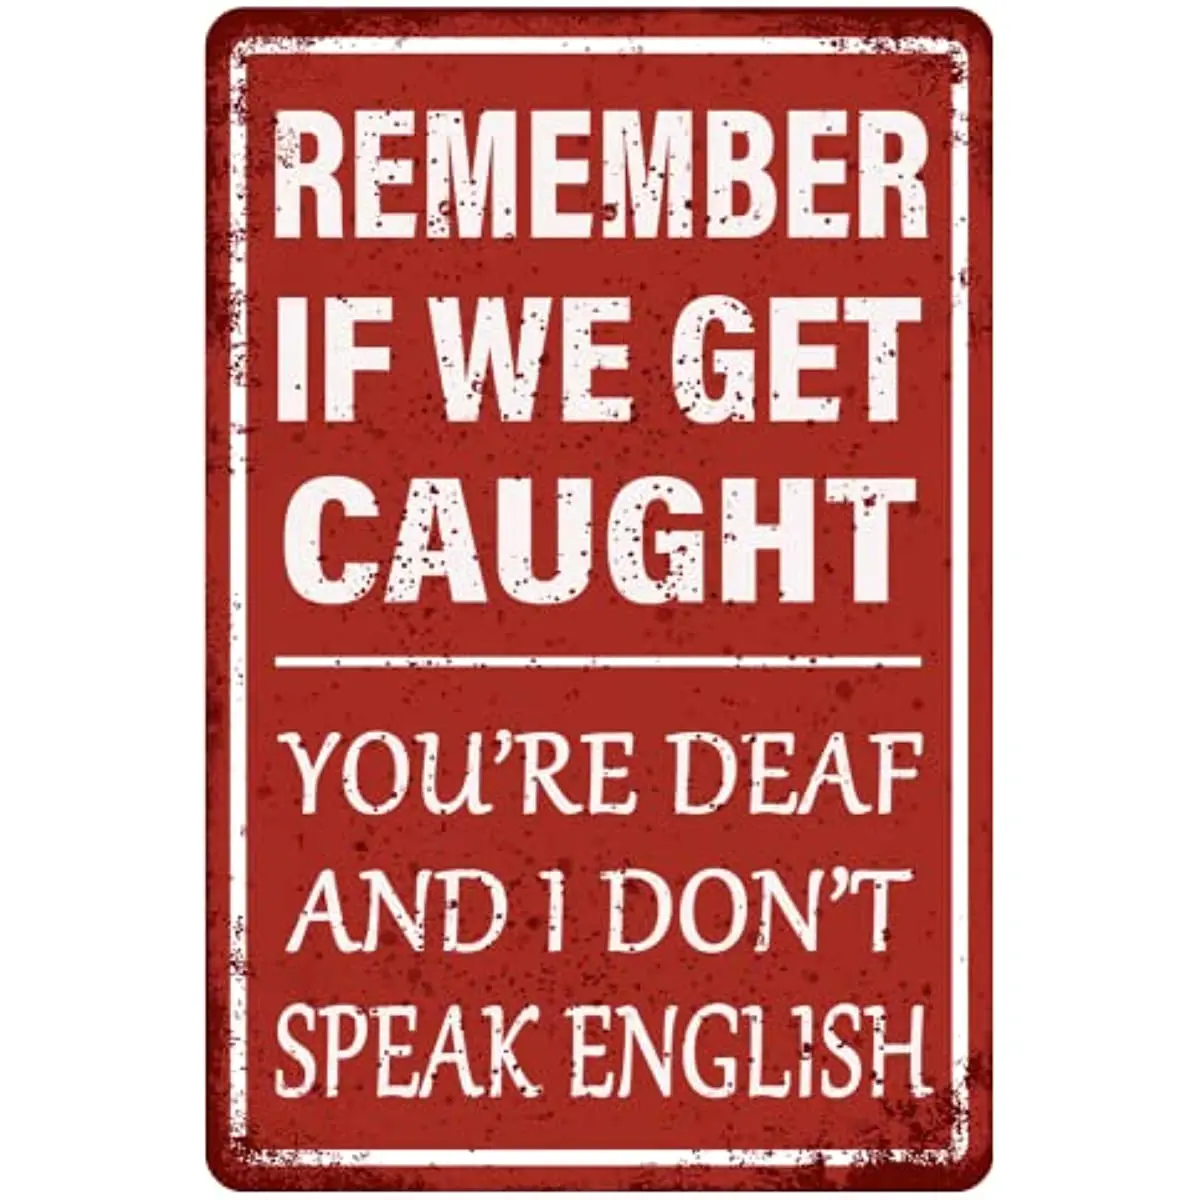 

Funny Cave If You're Signs, Humor And Remember Bar Caught English, We Deaf Speak Decor Tin Garage Sign Man Metal Get Don't